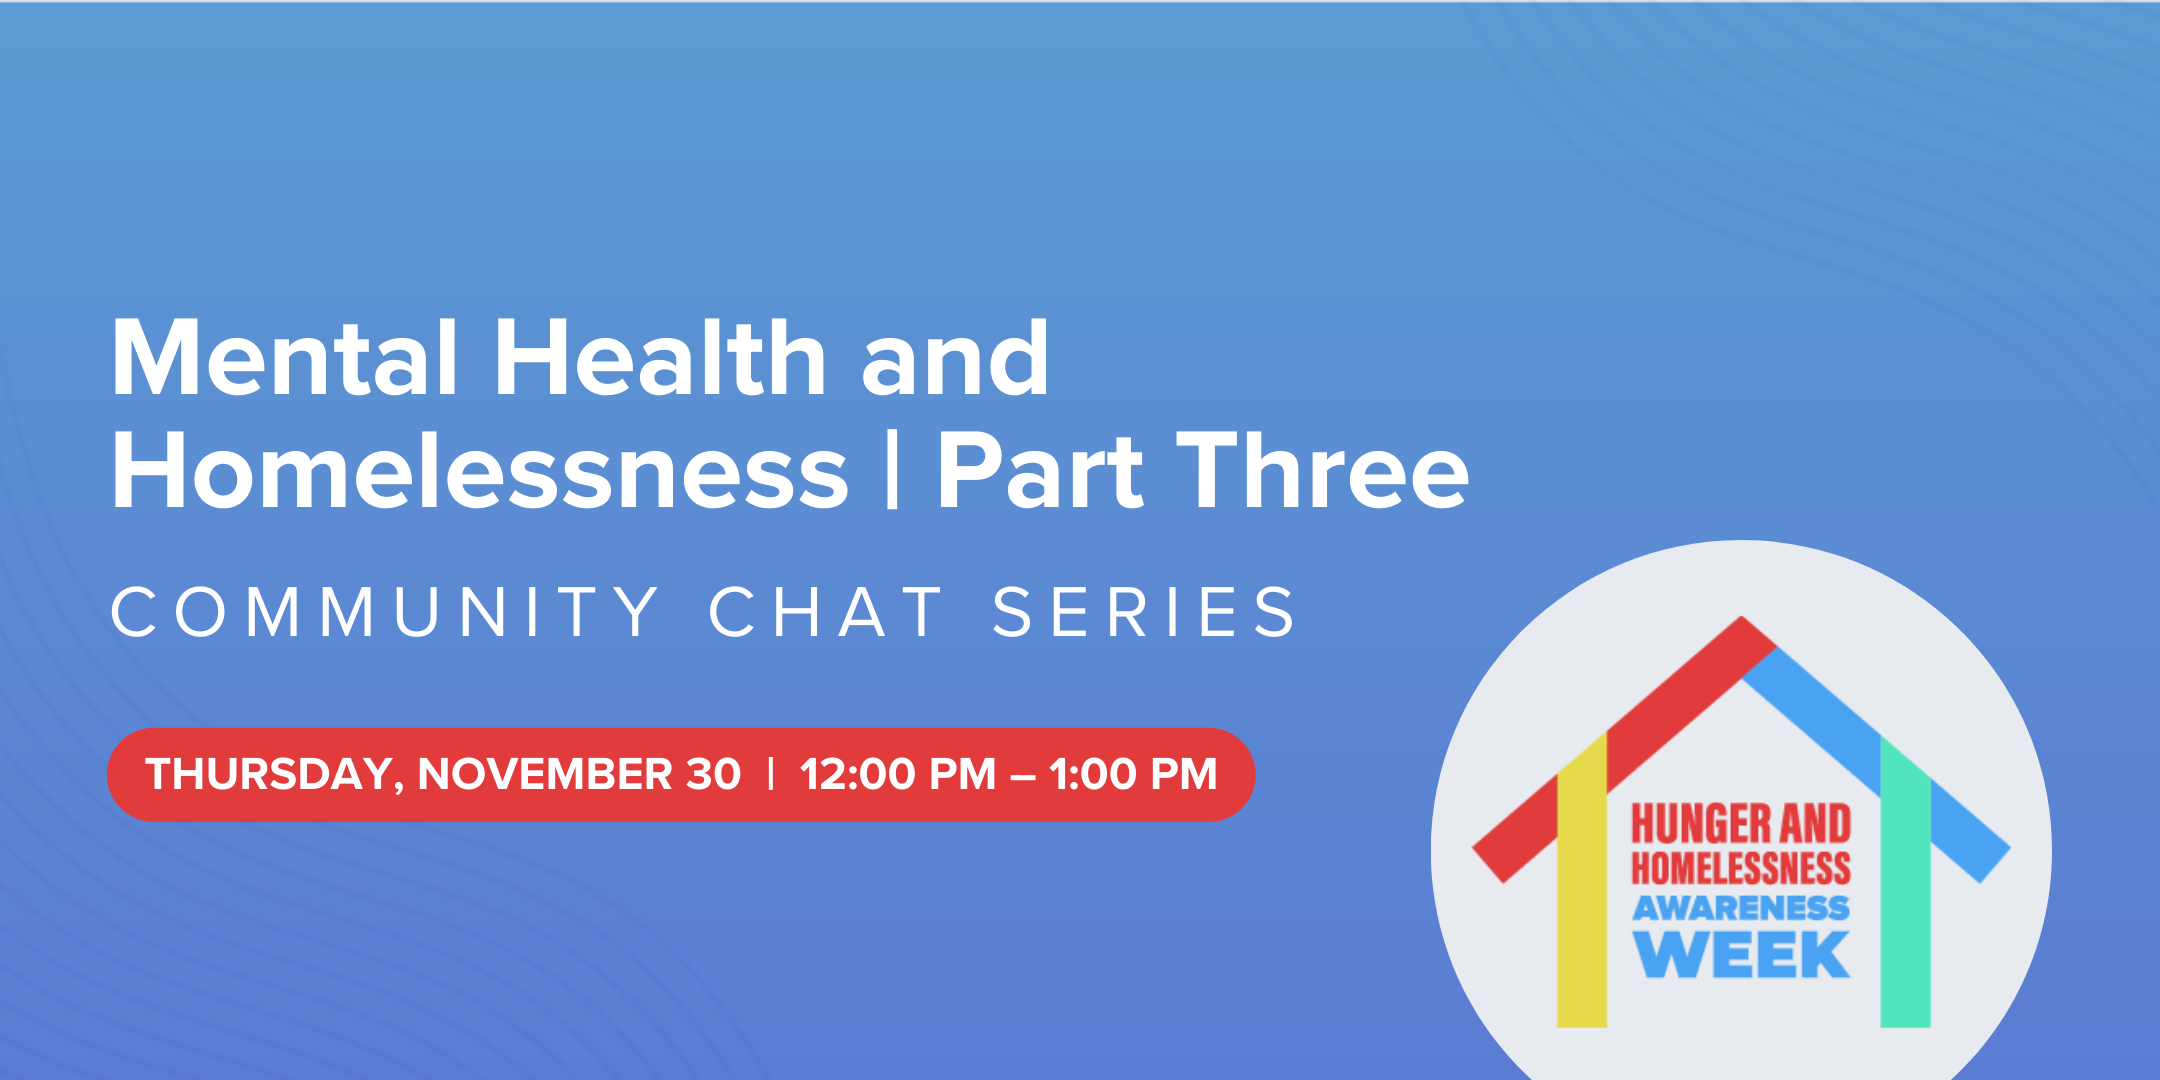 Mental Health and Homelessness Part Three Community Chat